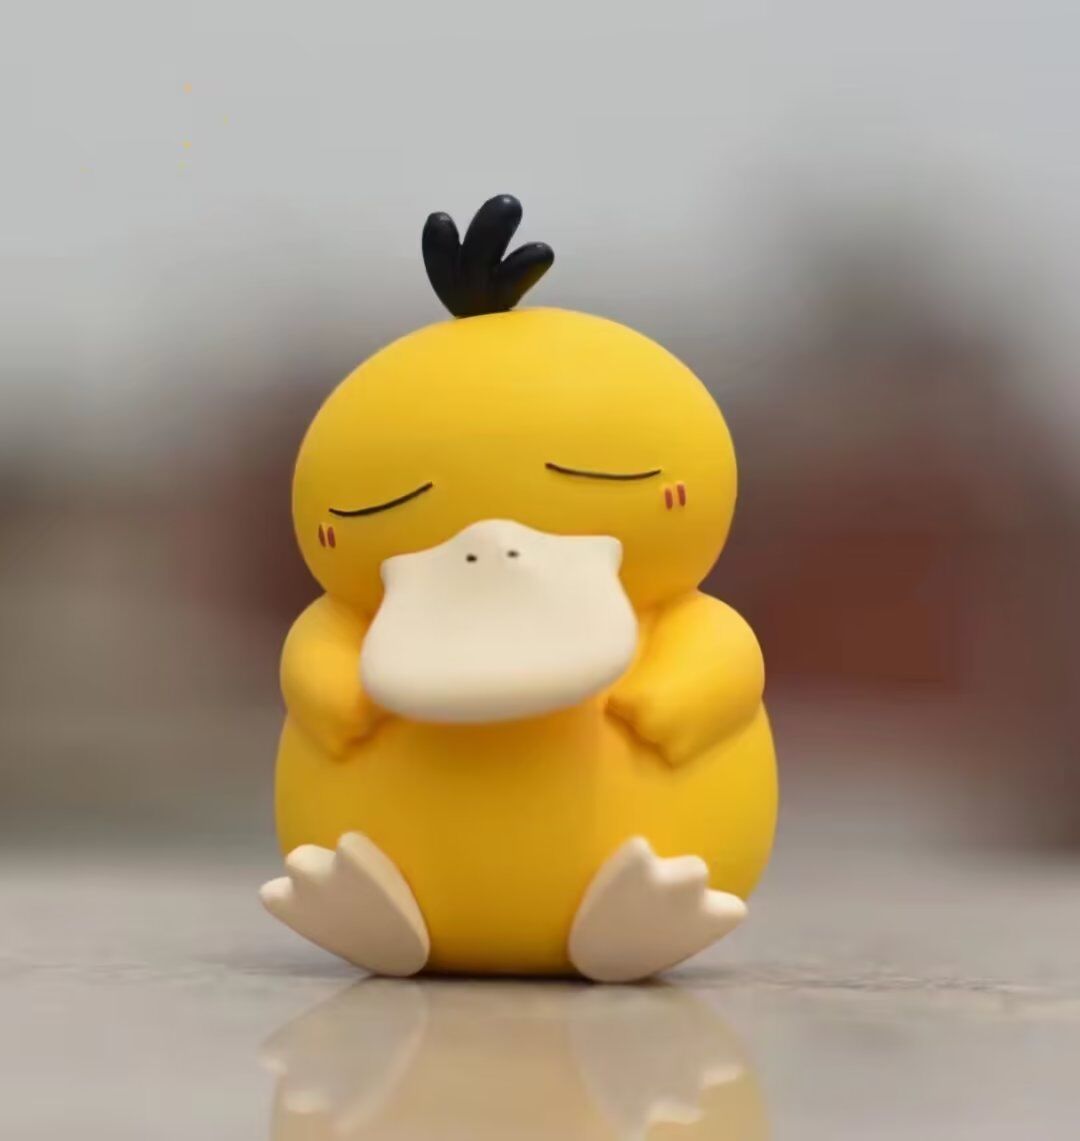 Pocket Monster Cute Baby Sleep Psyduck Small Snorlax Large Snorlax Anime